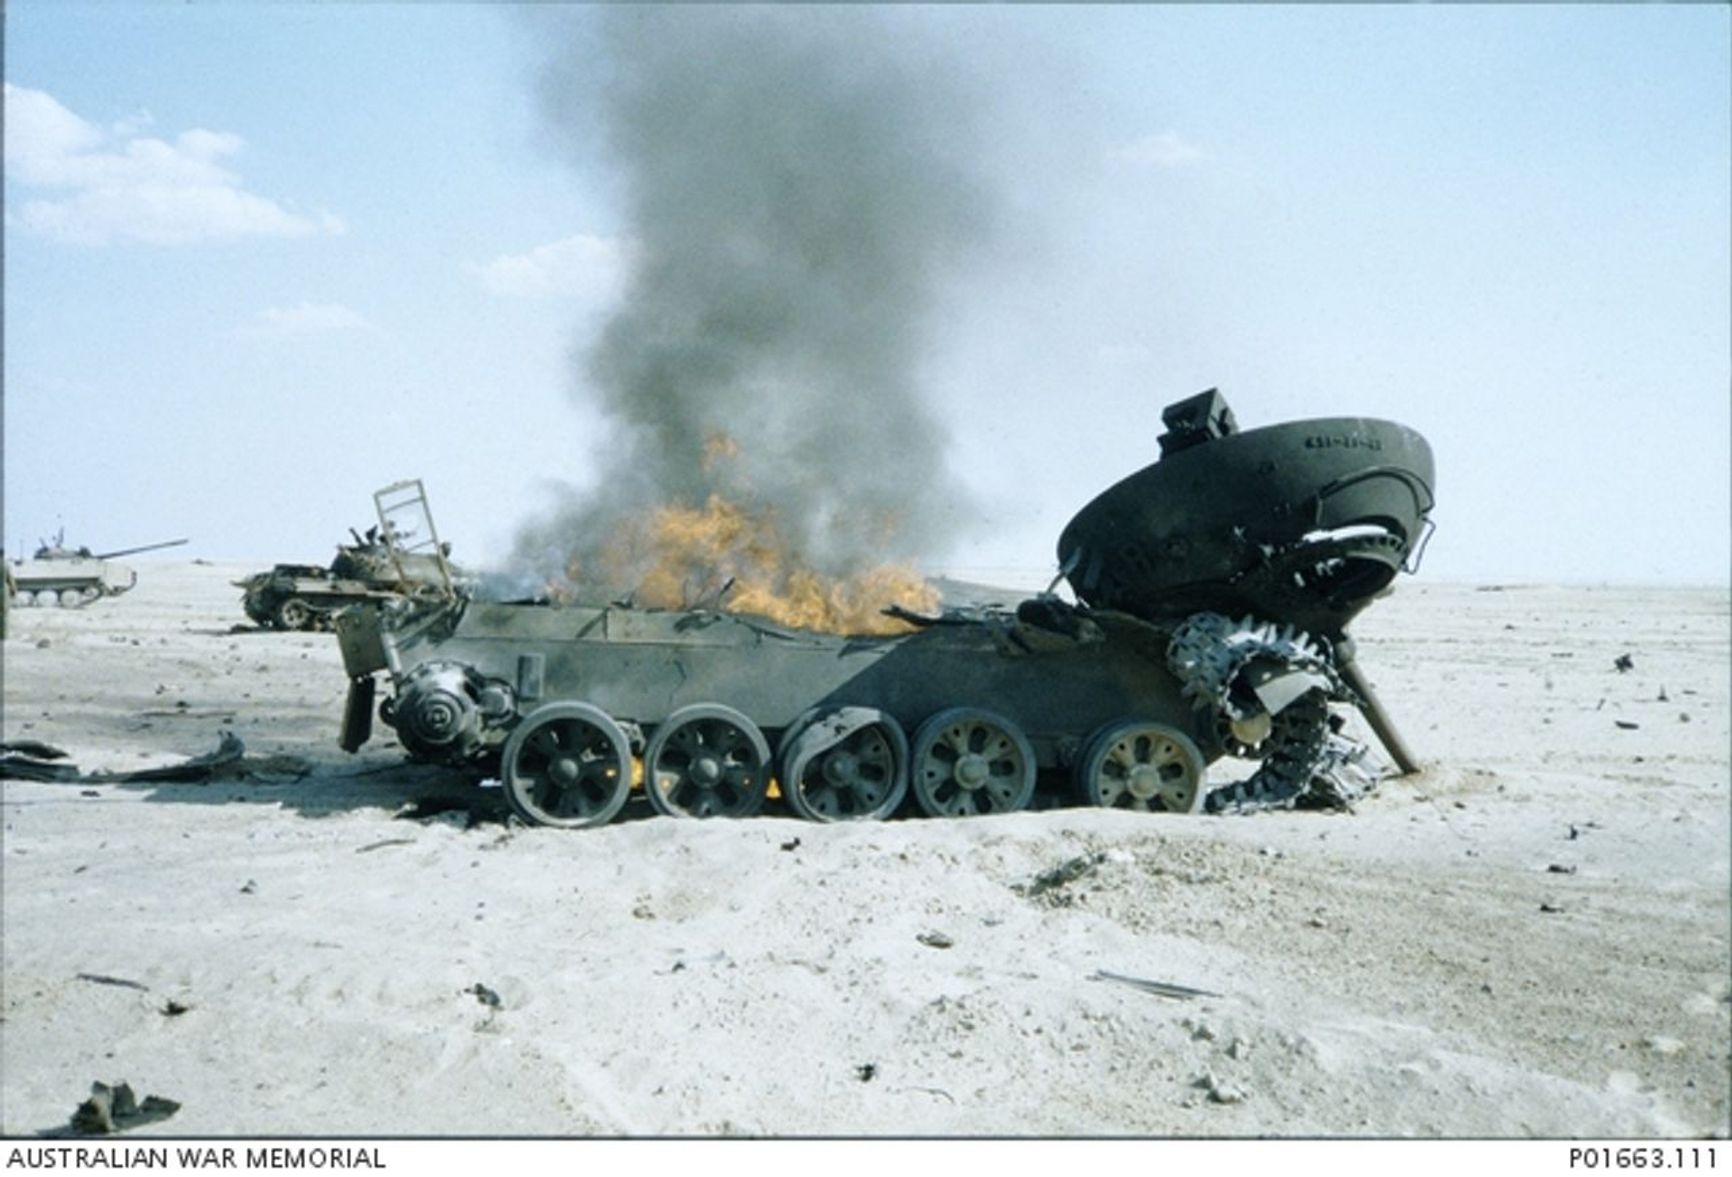 An Iraqi T-55 destroyed in the Gulf War